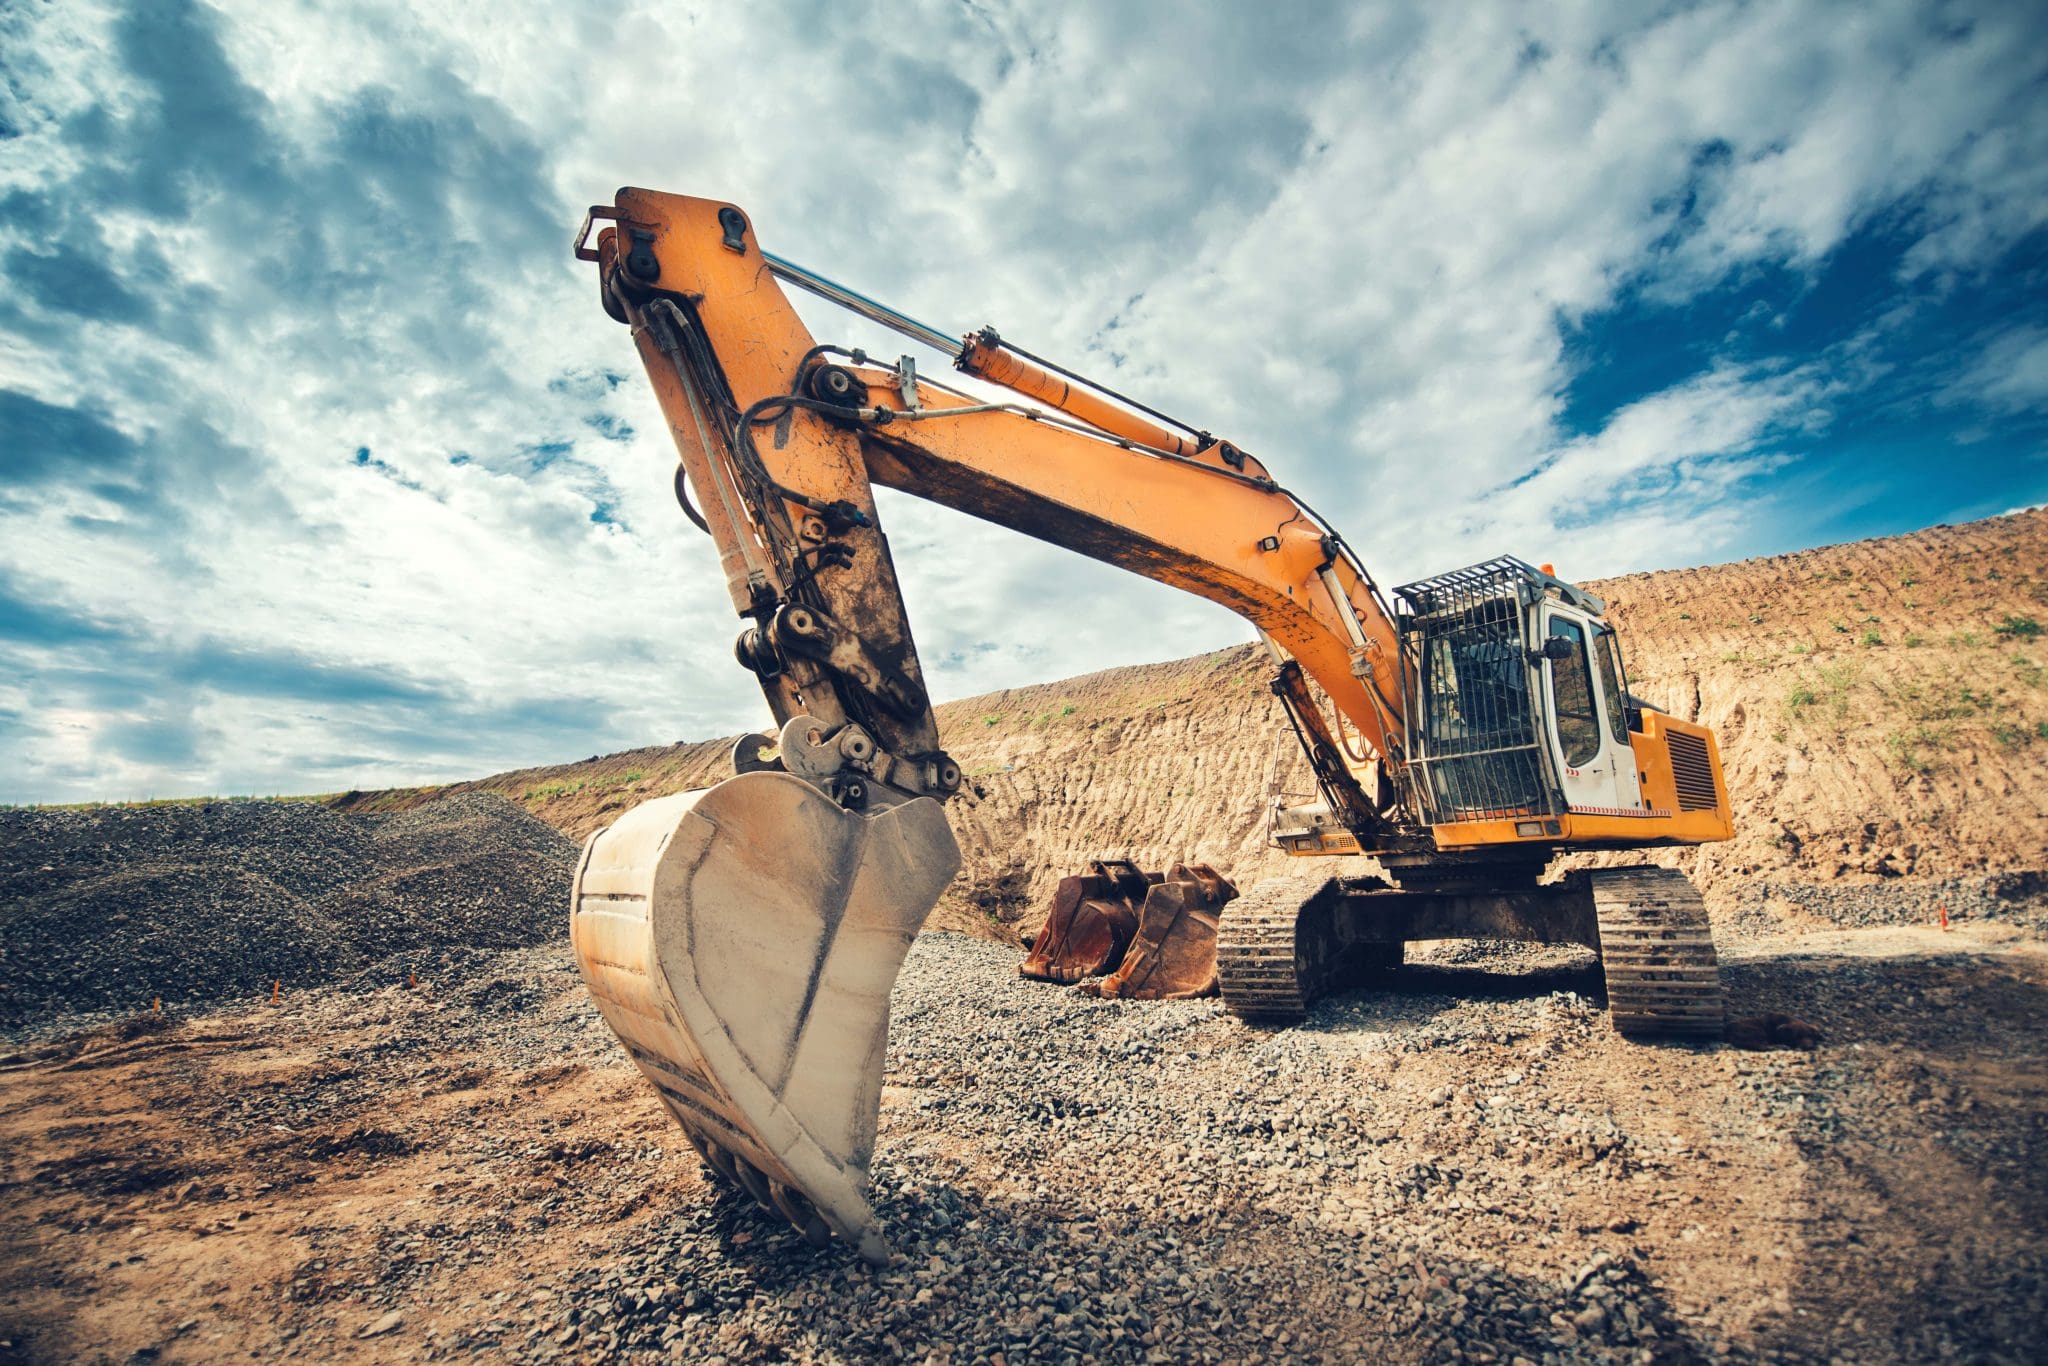 How to Operate an Excavator?